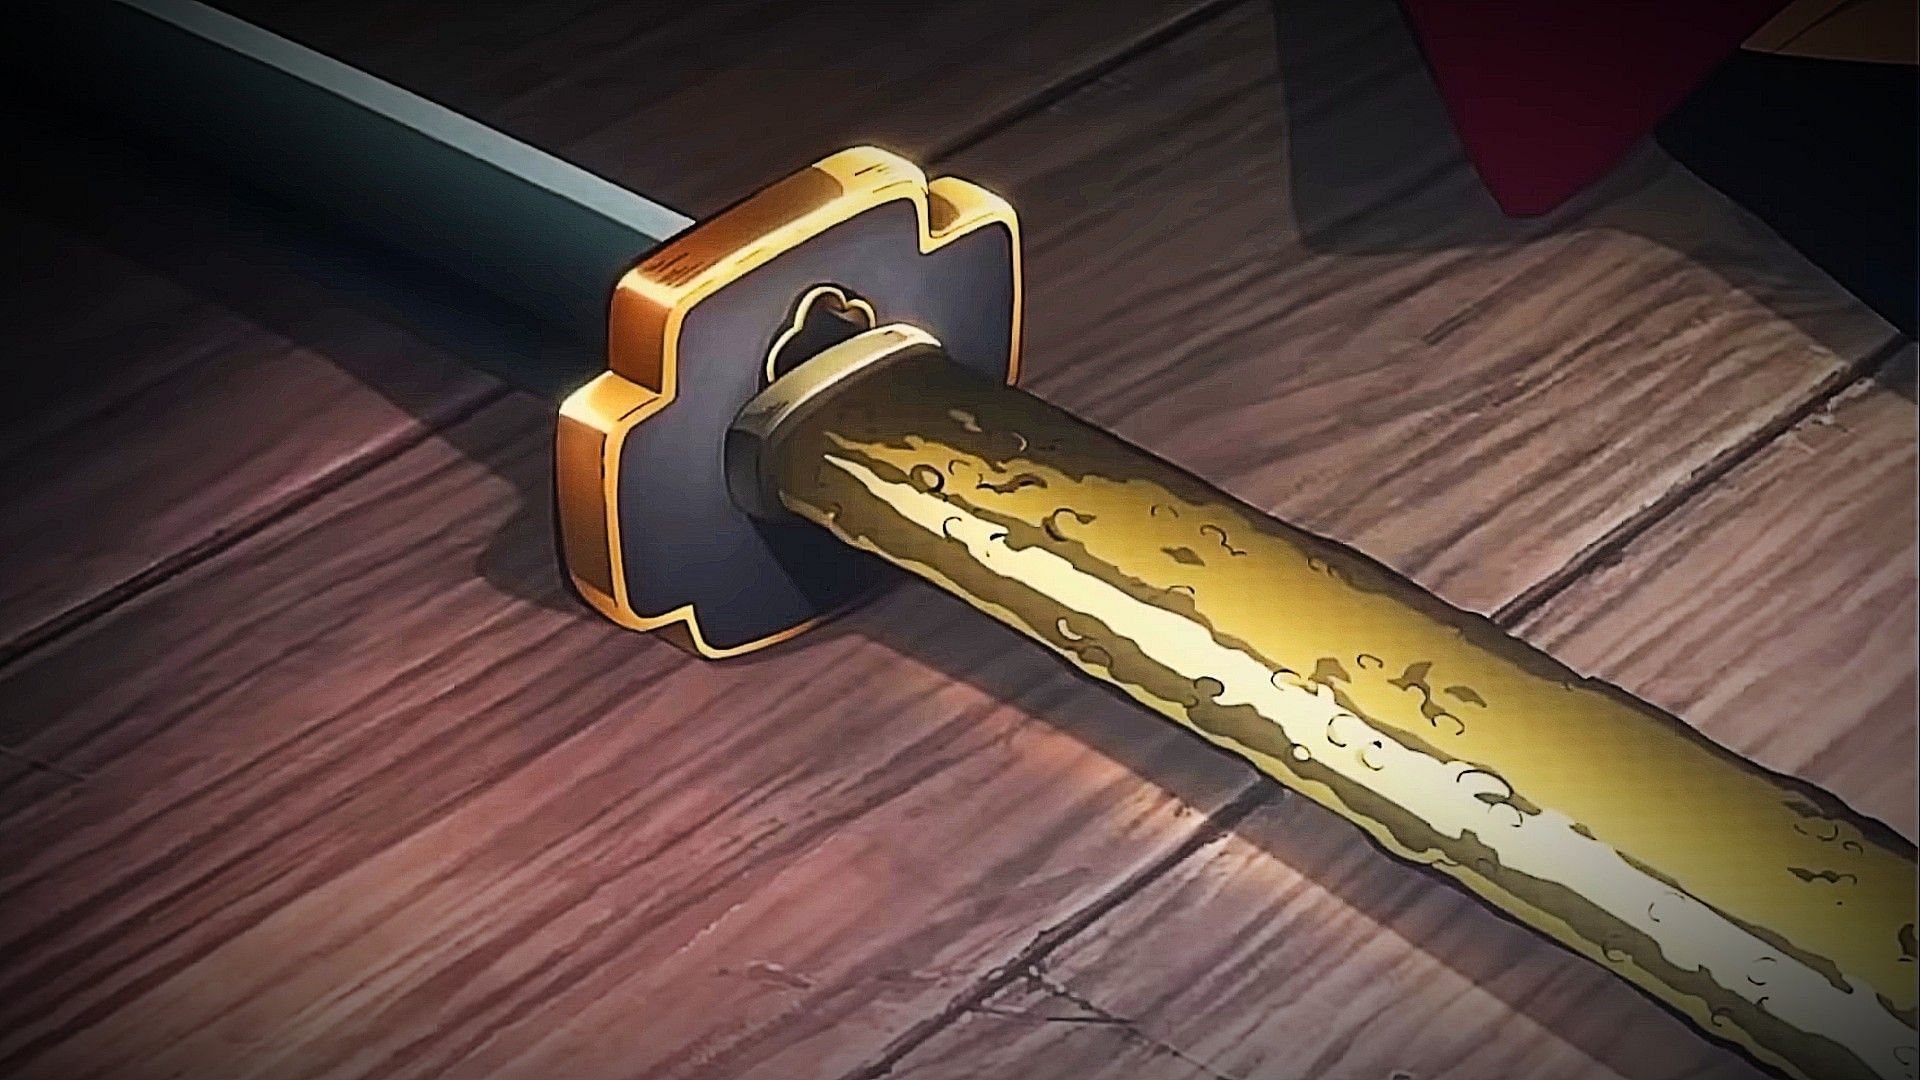 Haganezuka continues working on Yoriichi's Sword while being attacked